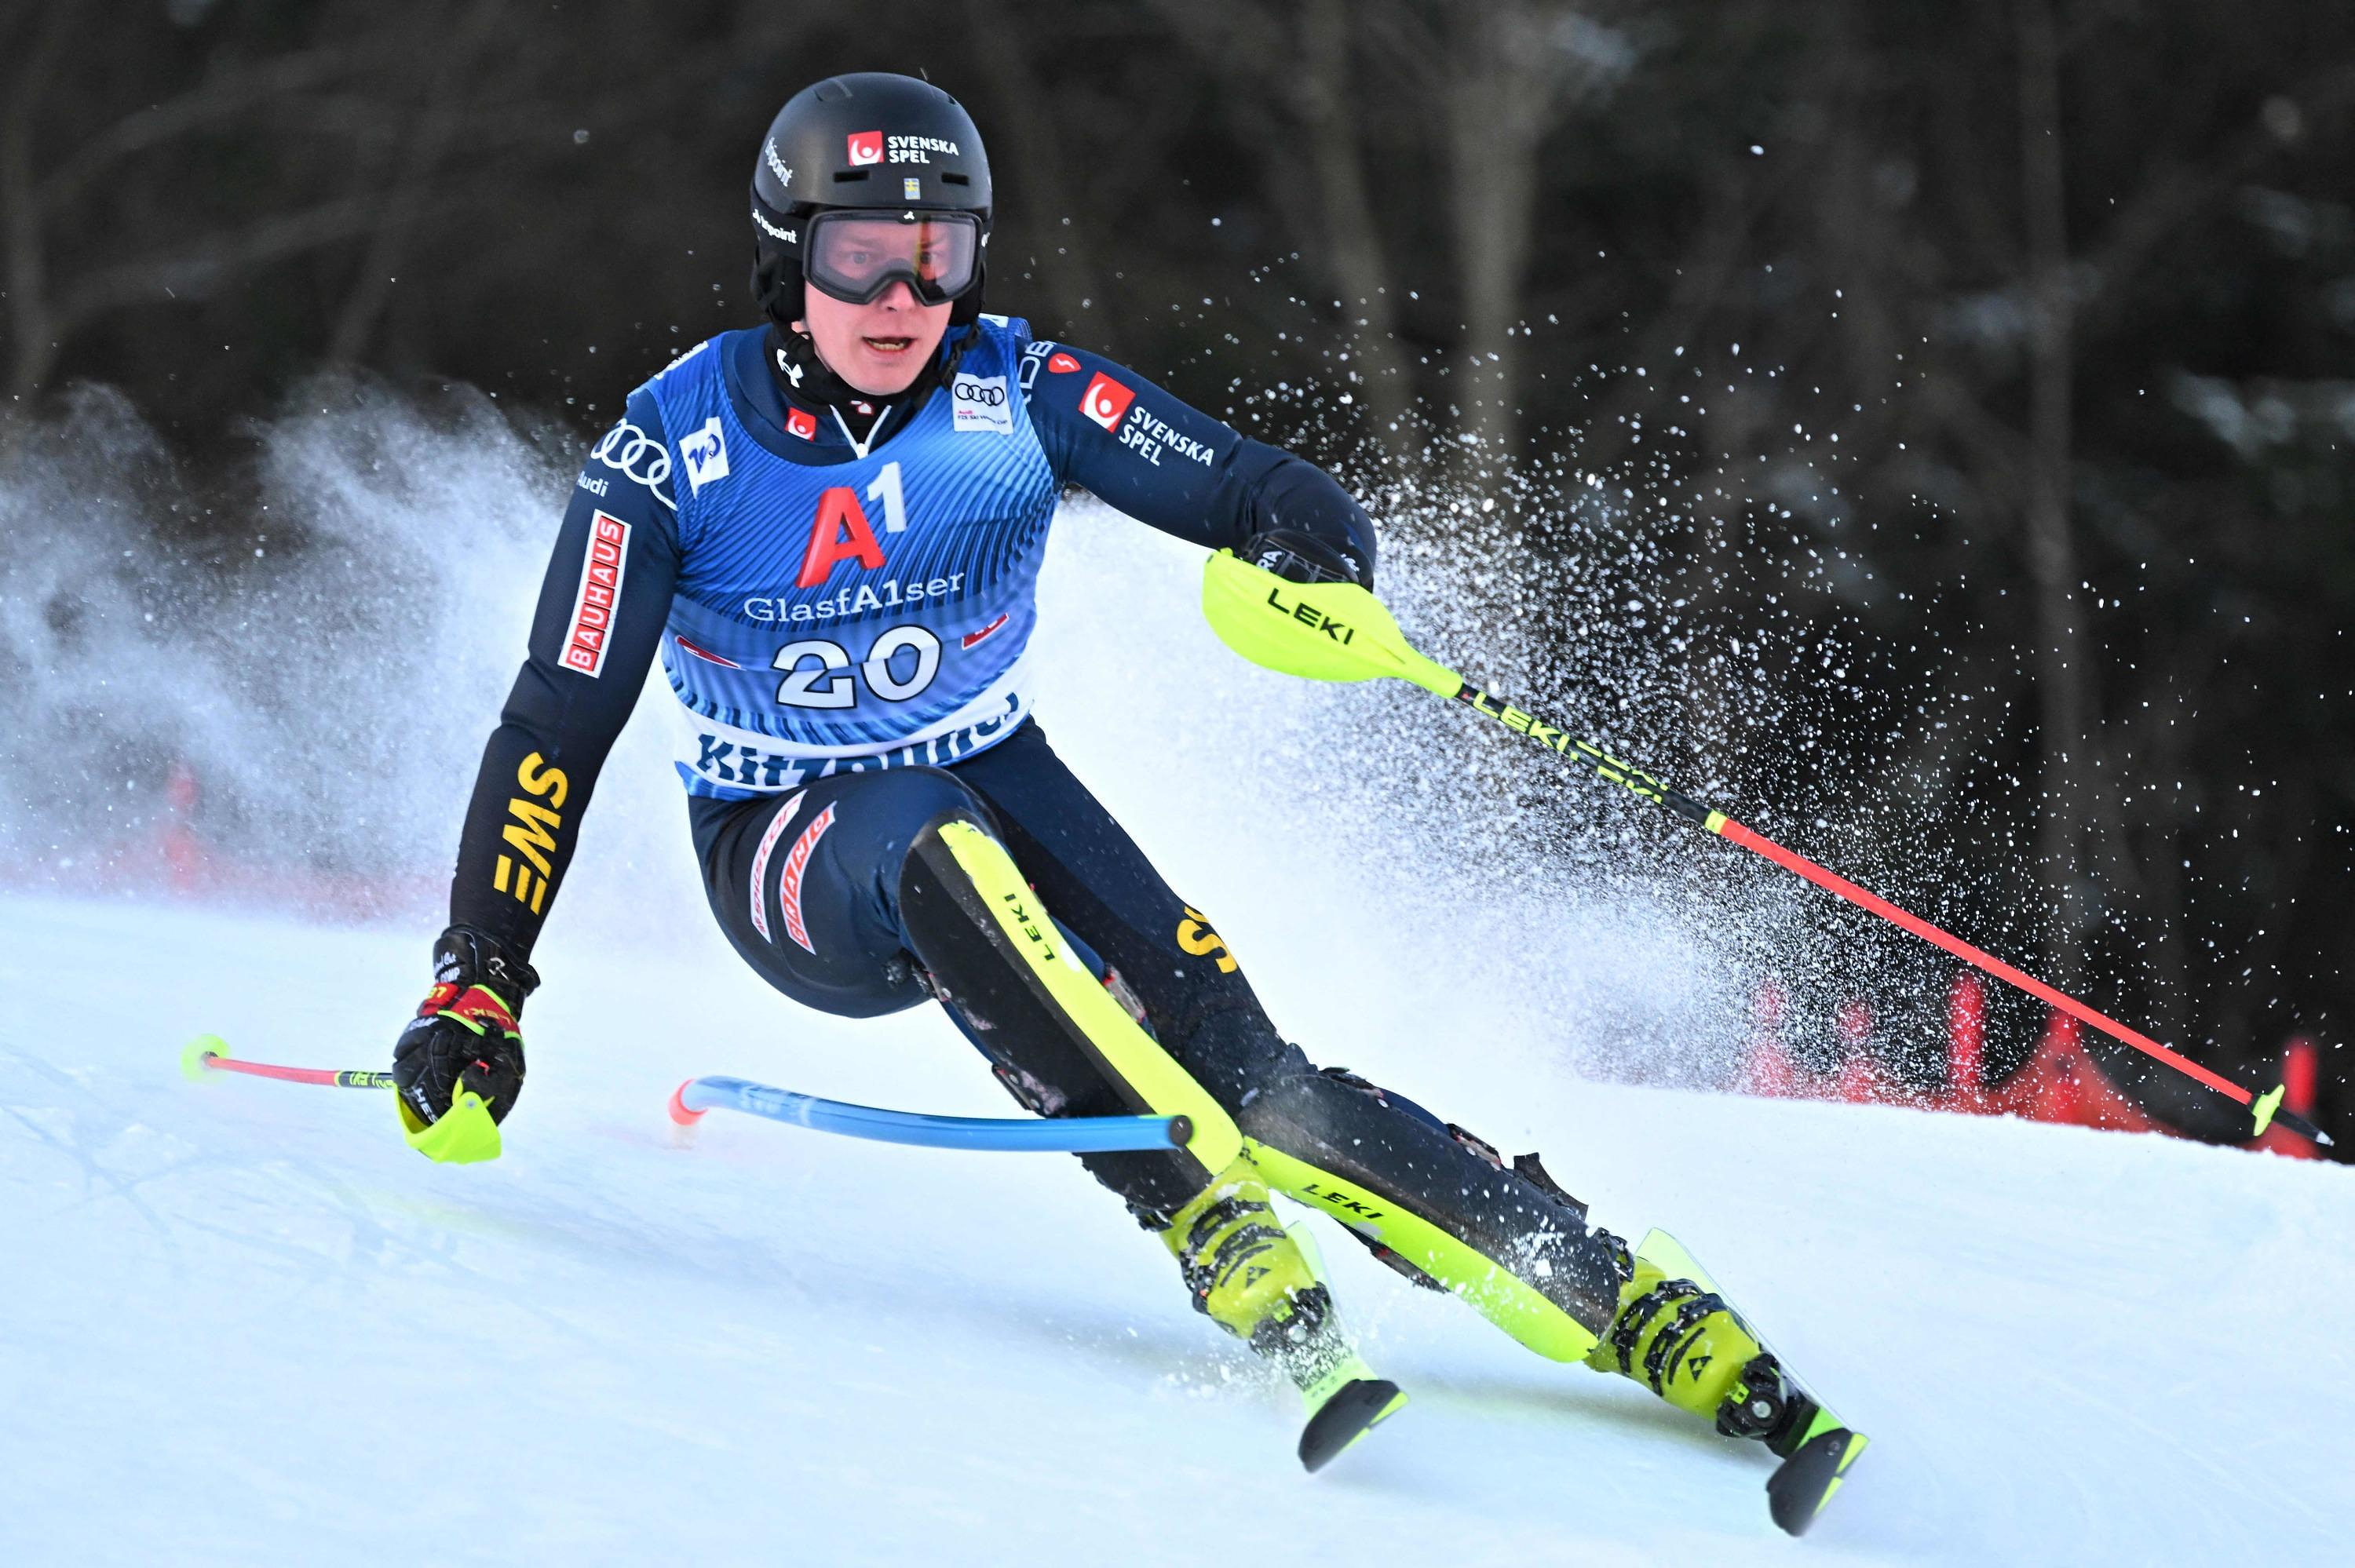 Skiing: the Swede Jakobsen leads the 1st round of the Kitzbühel slalom, Clément Noël 5th